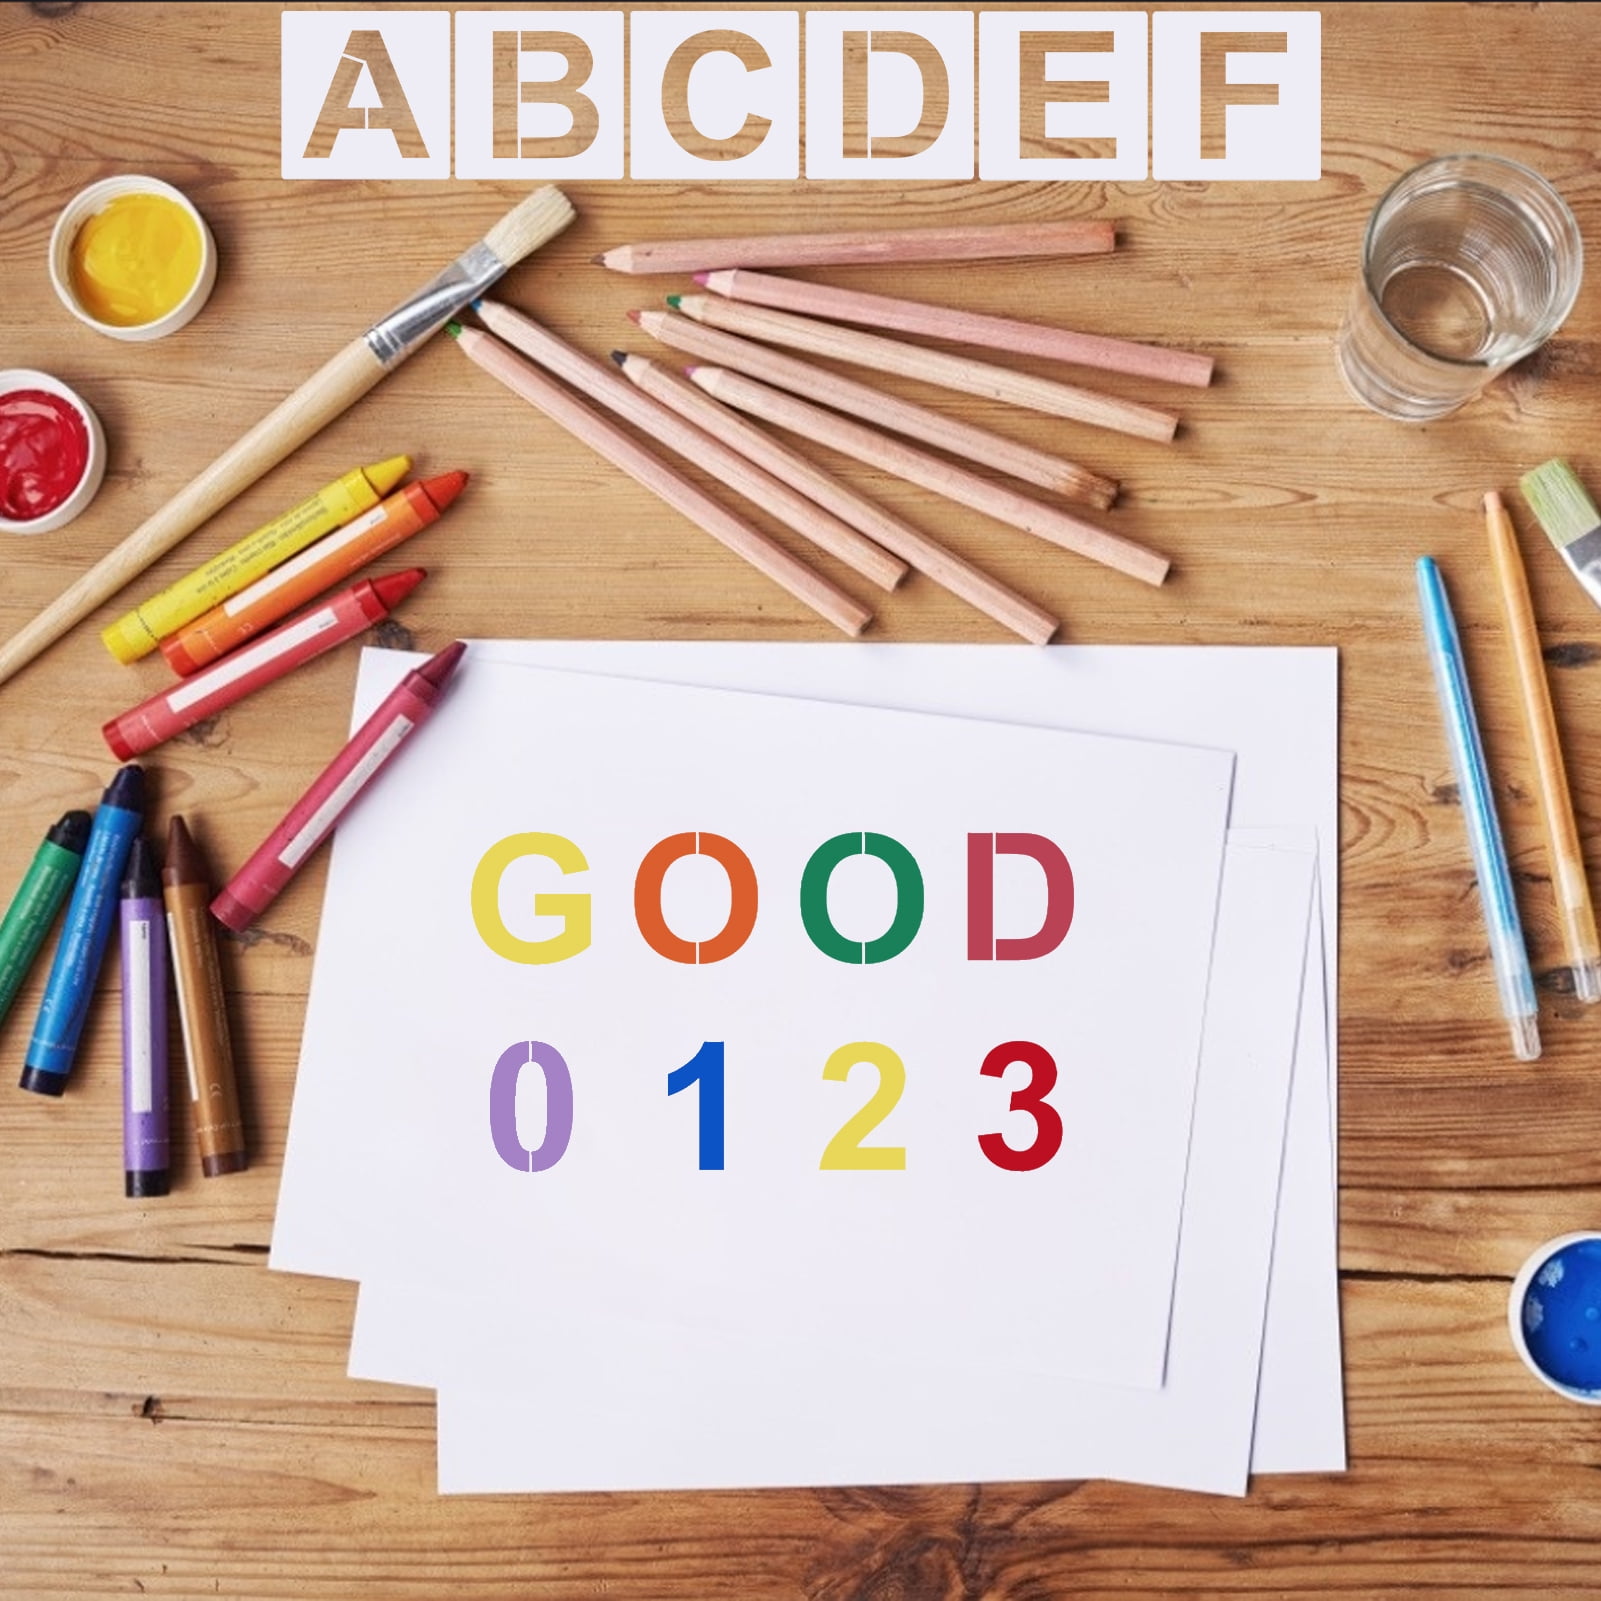 Mossdecal 2 Letter Stencils and Numbers, 36 Pcs Alphabet Art Craft Stencils, Reusable Plastic Number Templates Letter Stencils for Painting on Wood, W